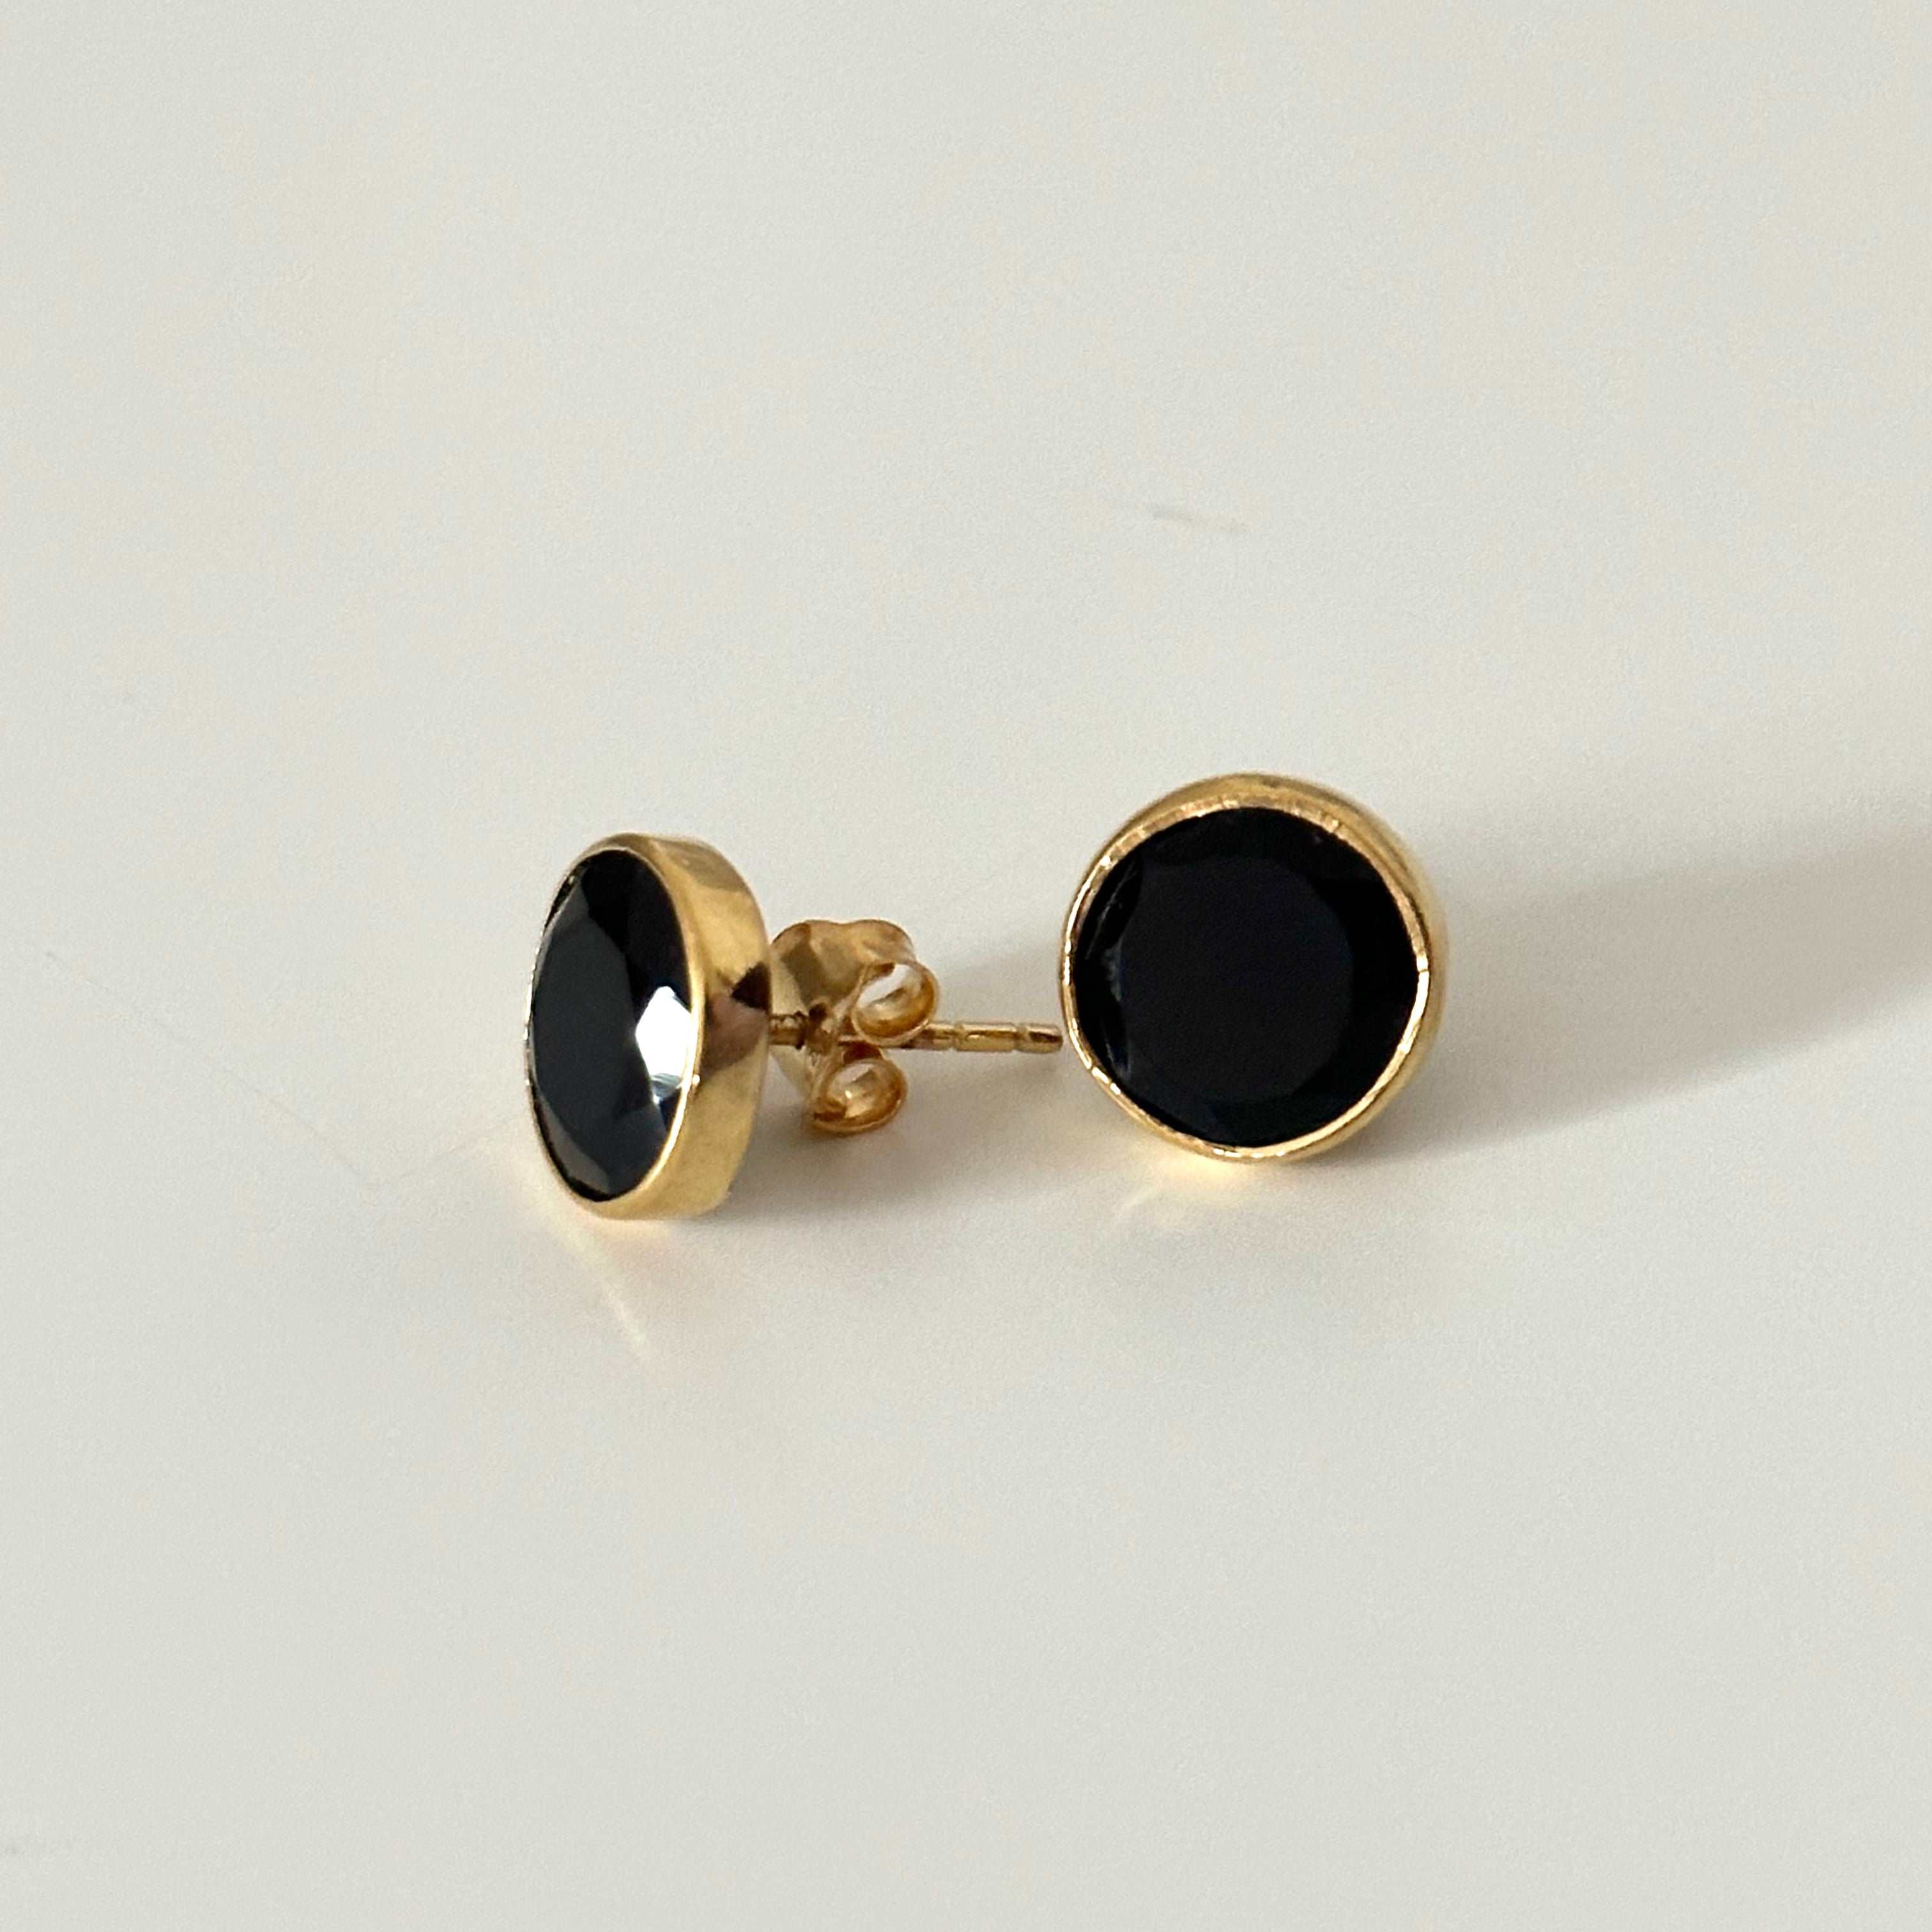 Black Onyx Studs in Gold Plated Sterling Silver with a Round Faceted Gemstone